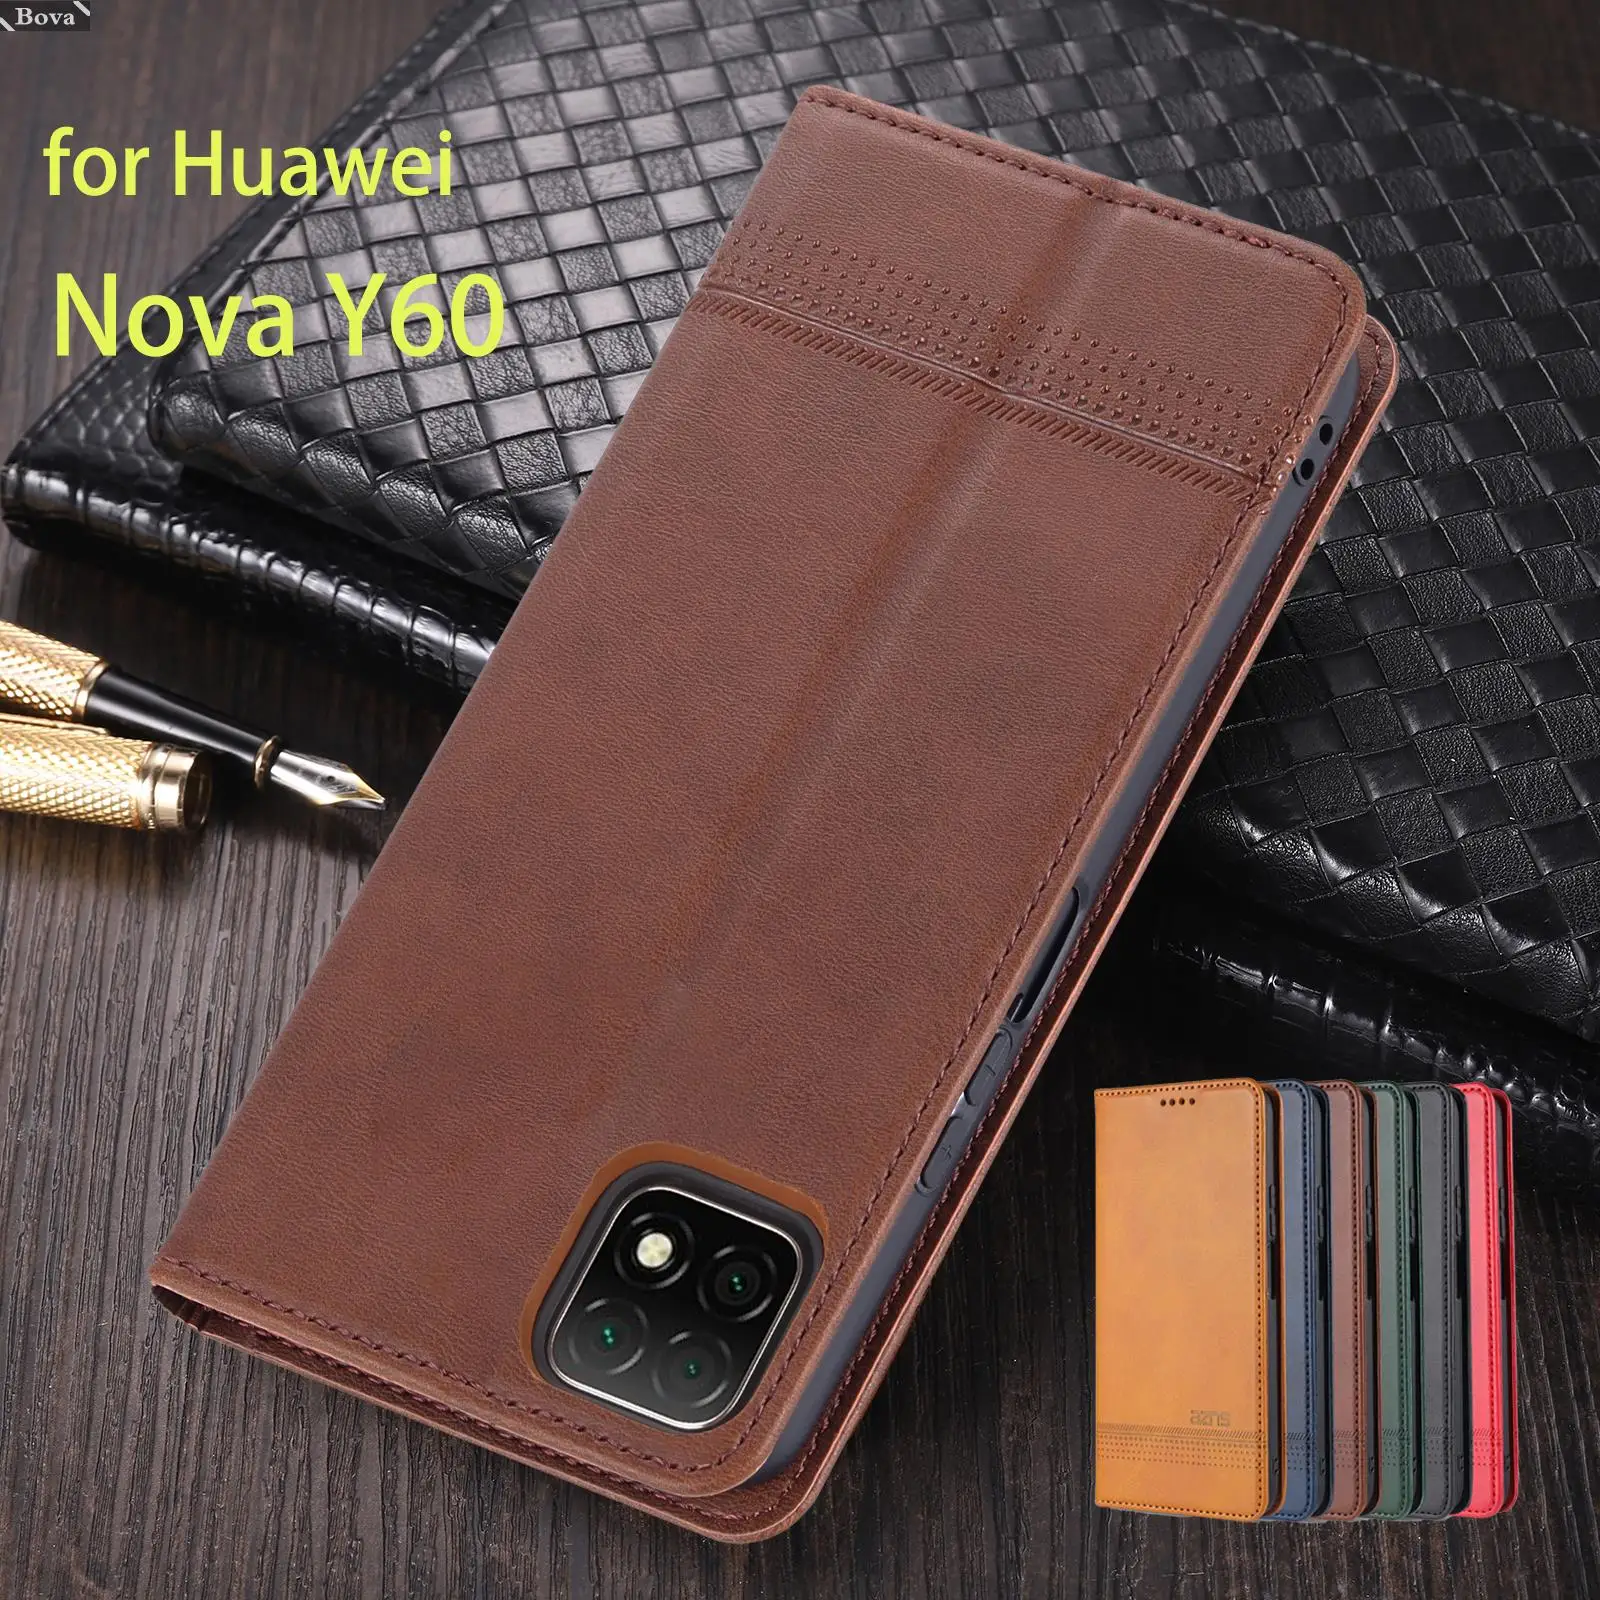 

Deluxe Magnetic Adsorption Leather Fitted Phone Case for Huawei Nova Y60 Y 60 Flip Cover Protective Case Capa Fundas Coque